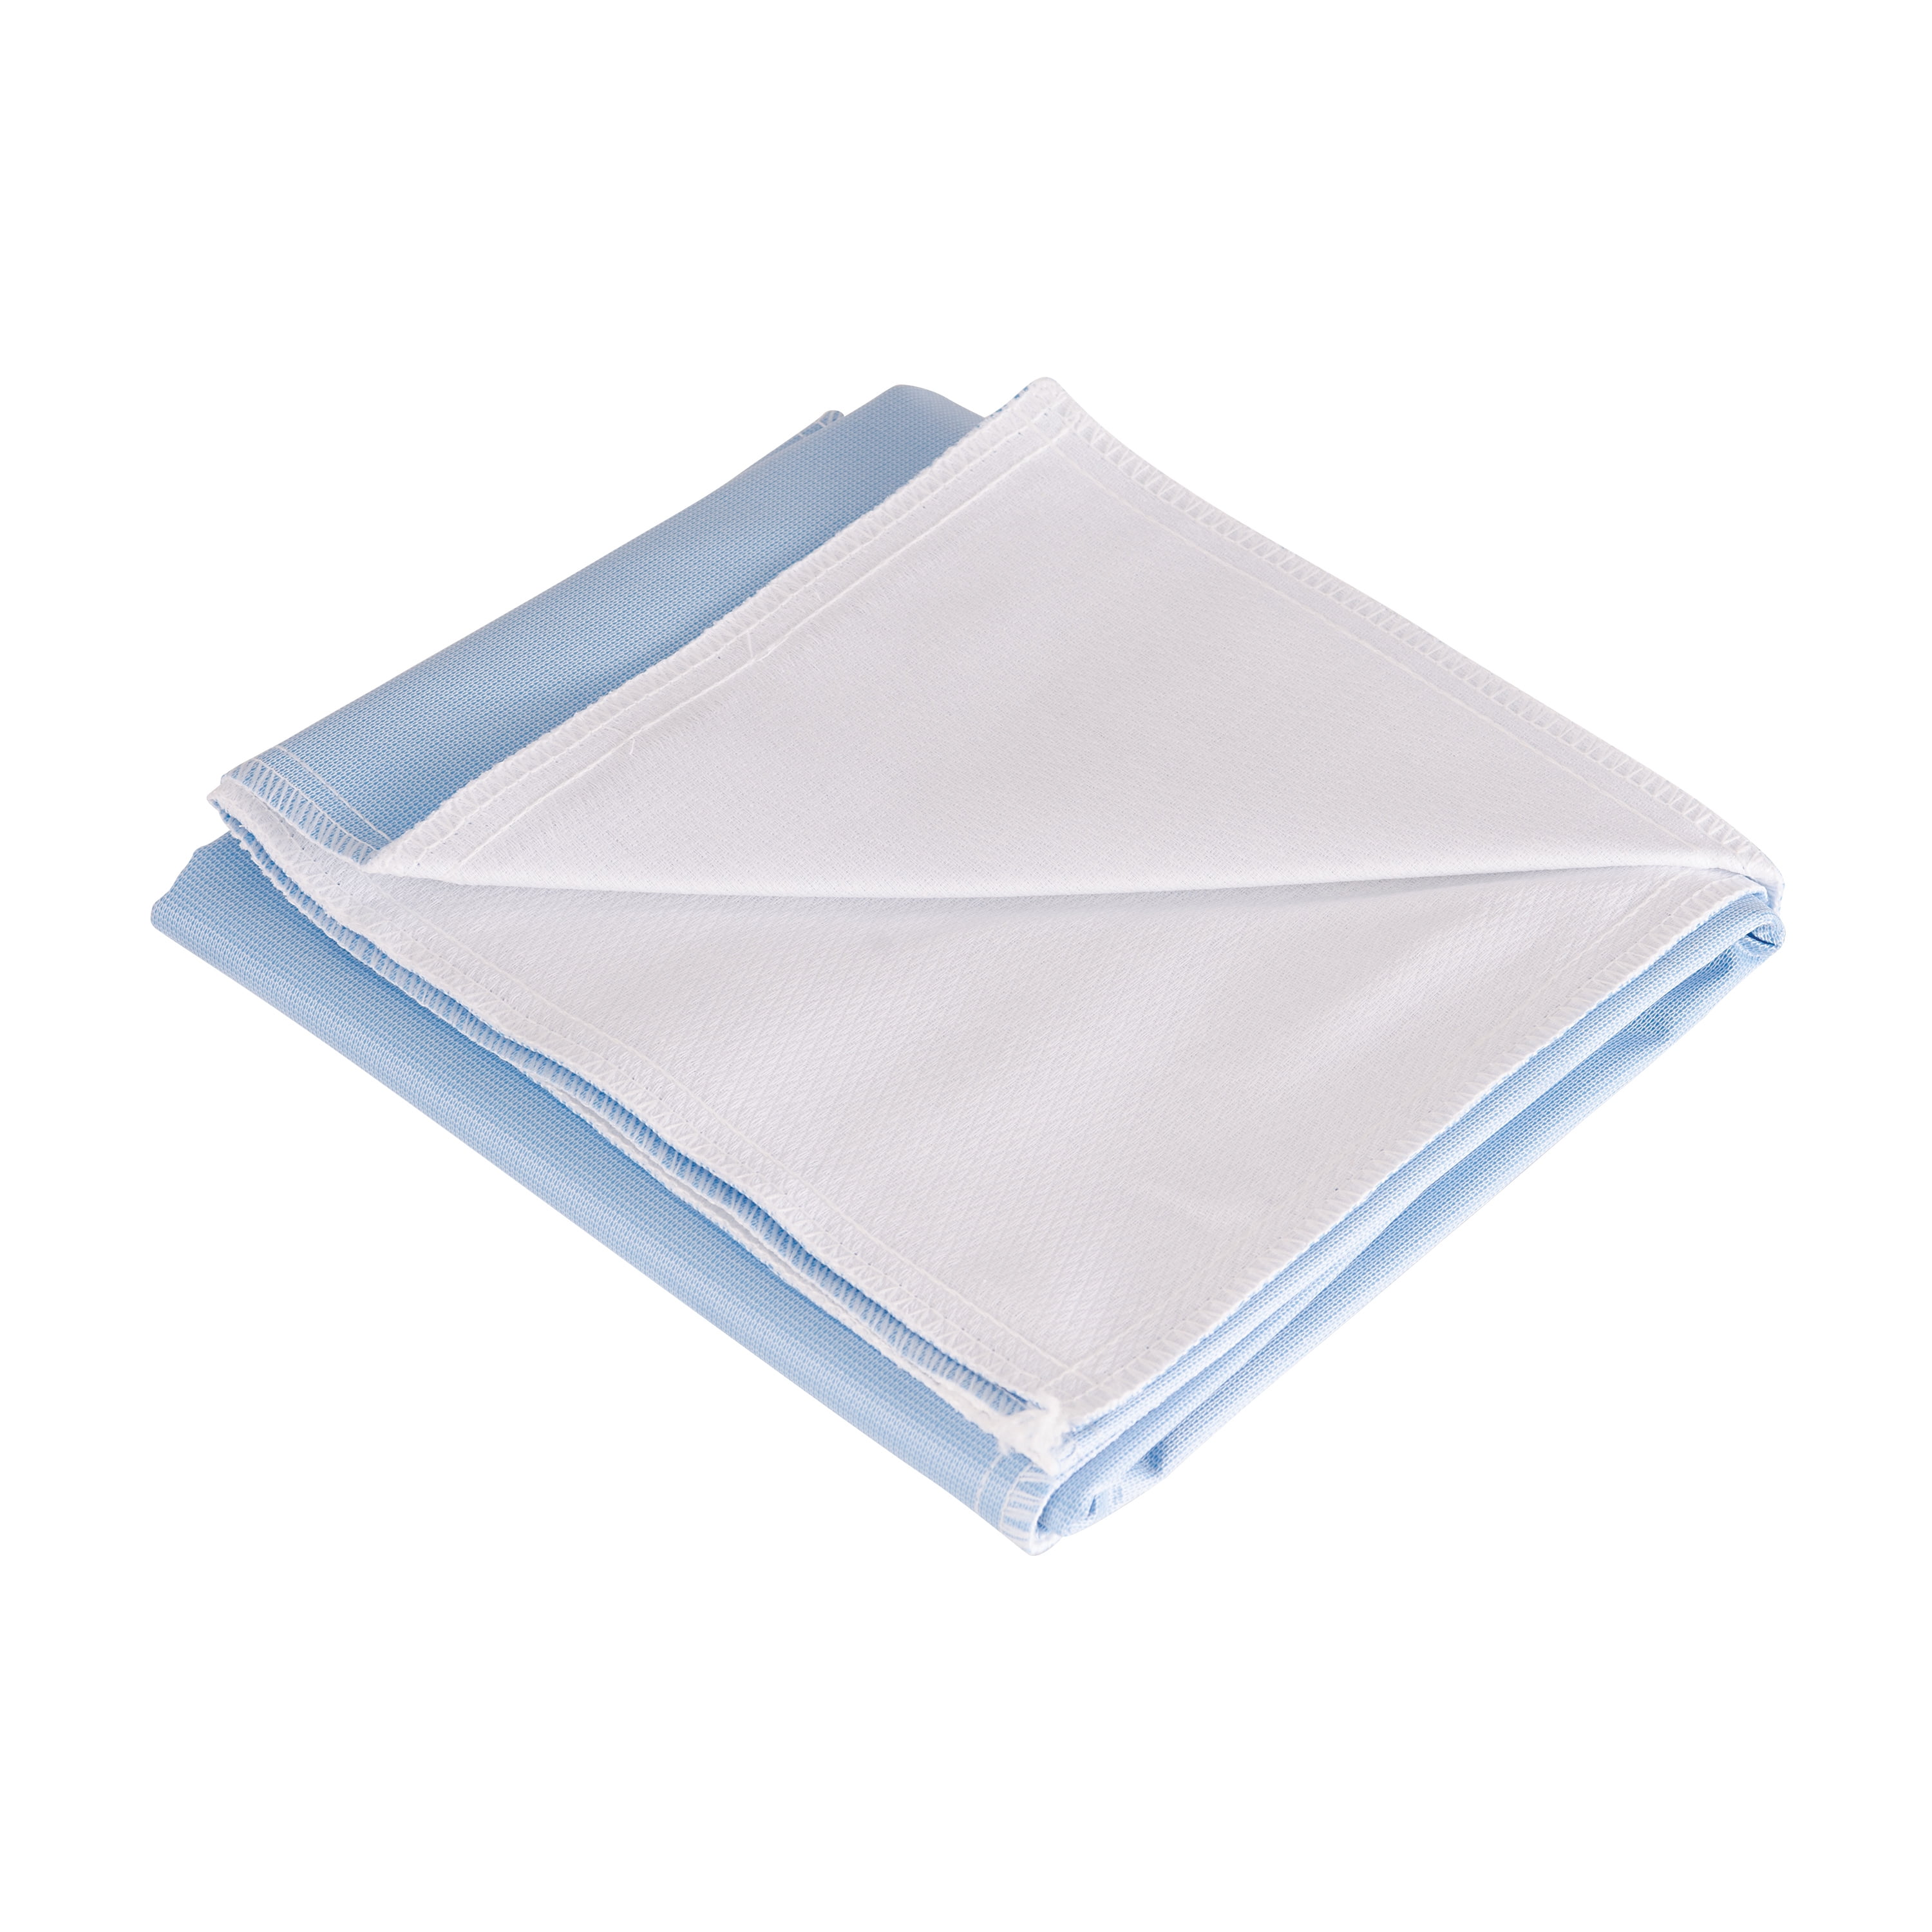 DMI Washable Underpads 34 in. x 35 in. (4-Pack)